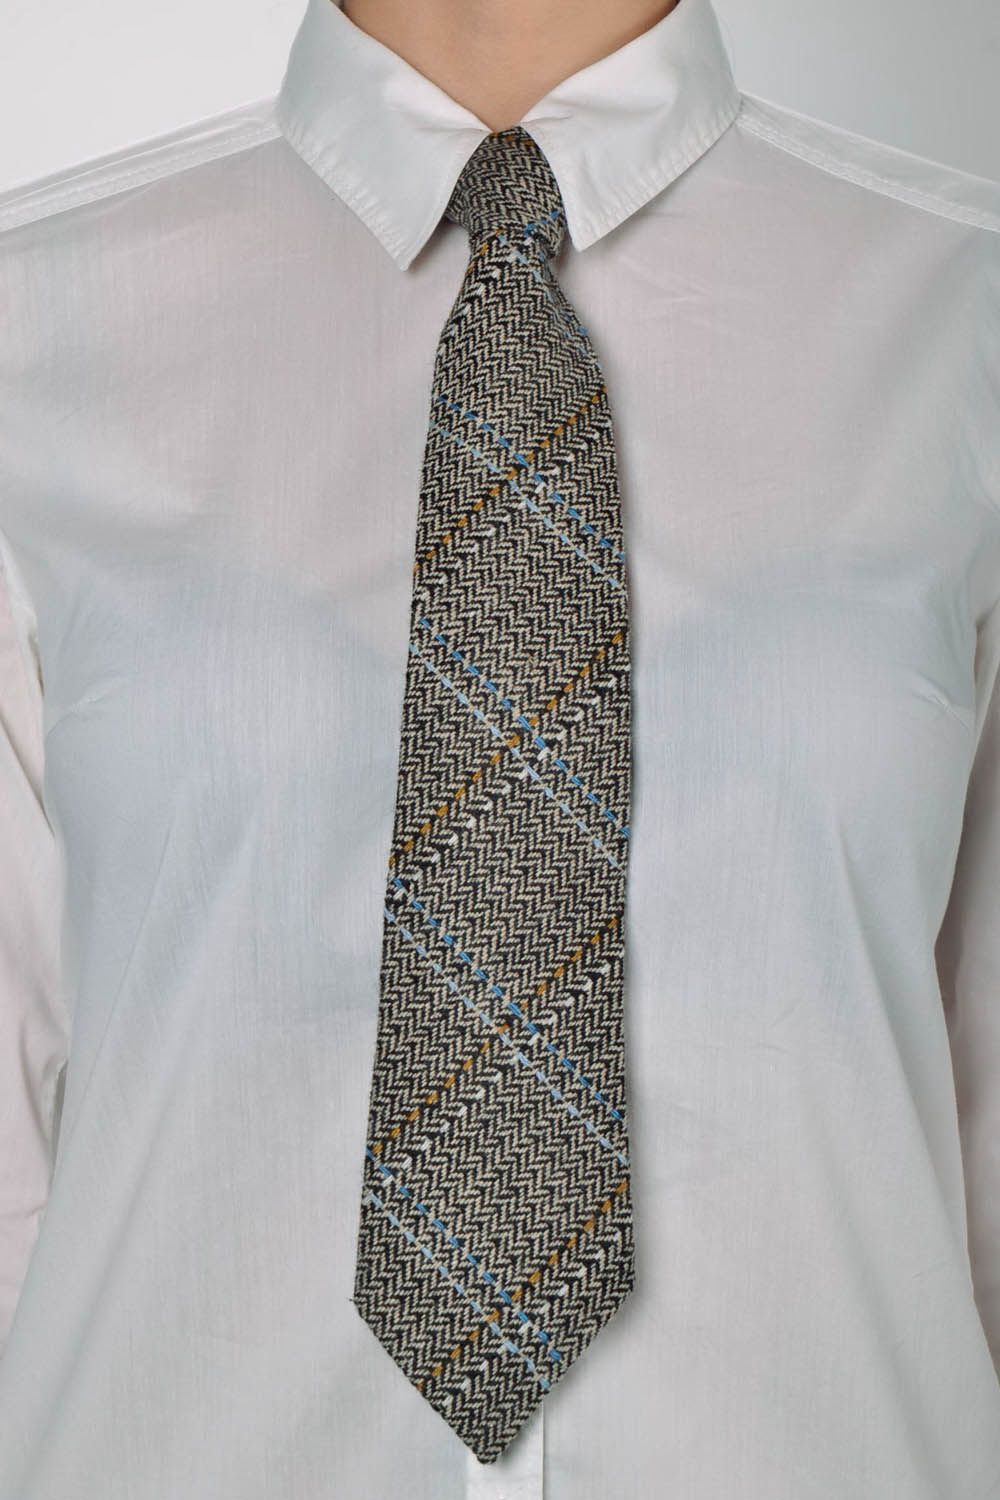 Gray and brown tie photo 5